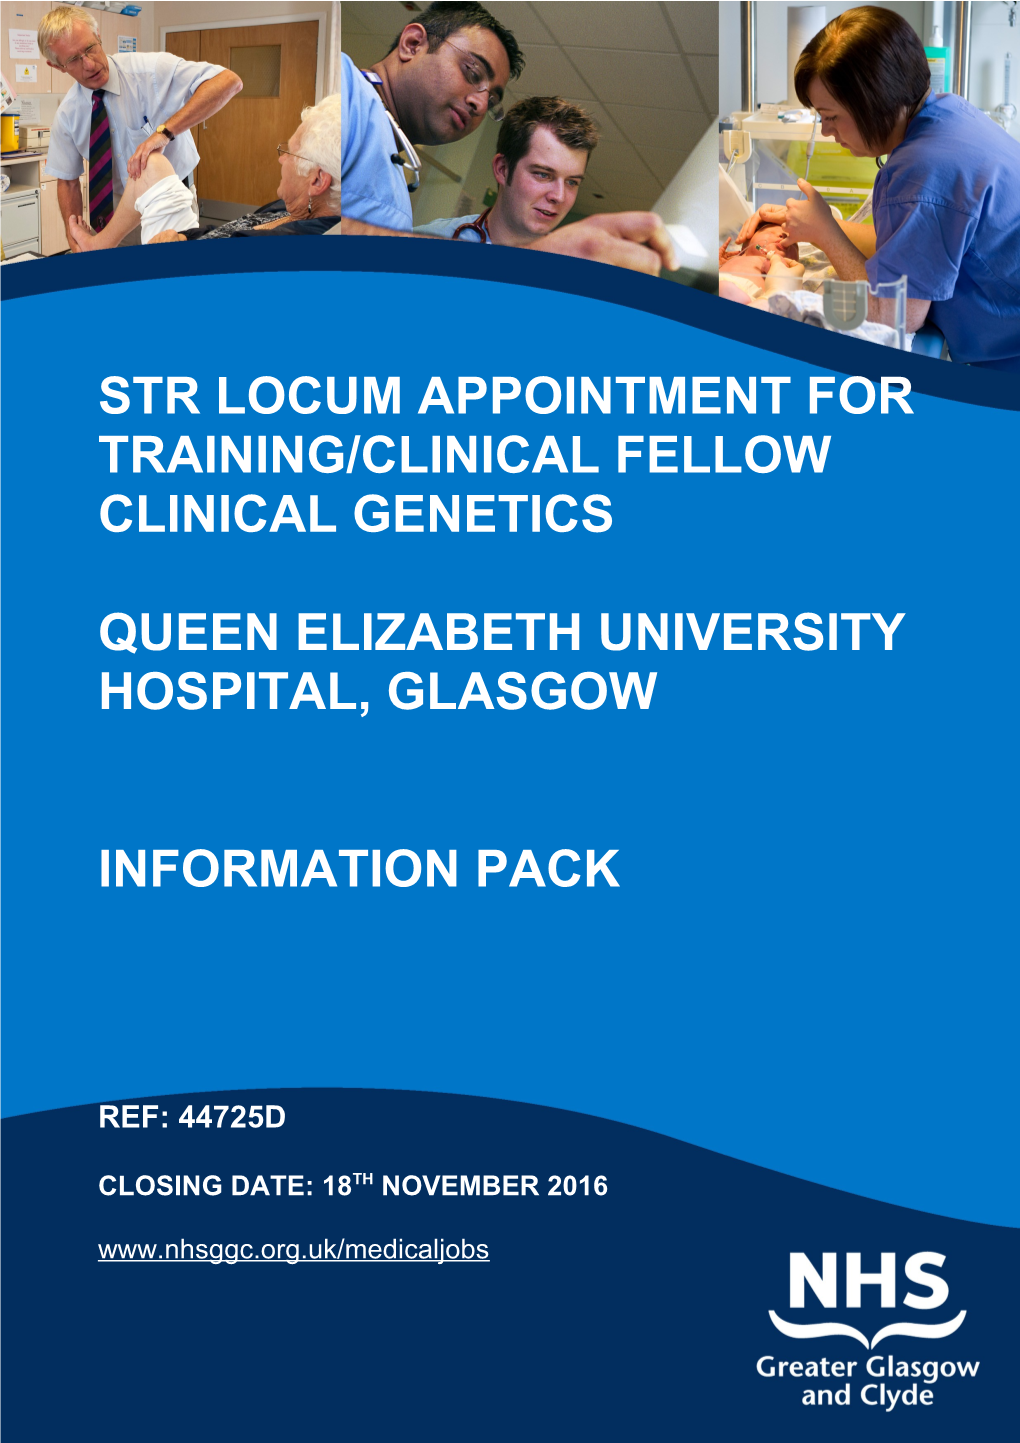 Str LOCUM APPOINTMENT for TRAINING/CLINICAL FELLOW